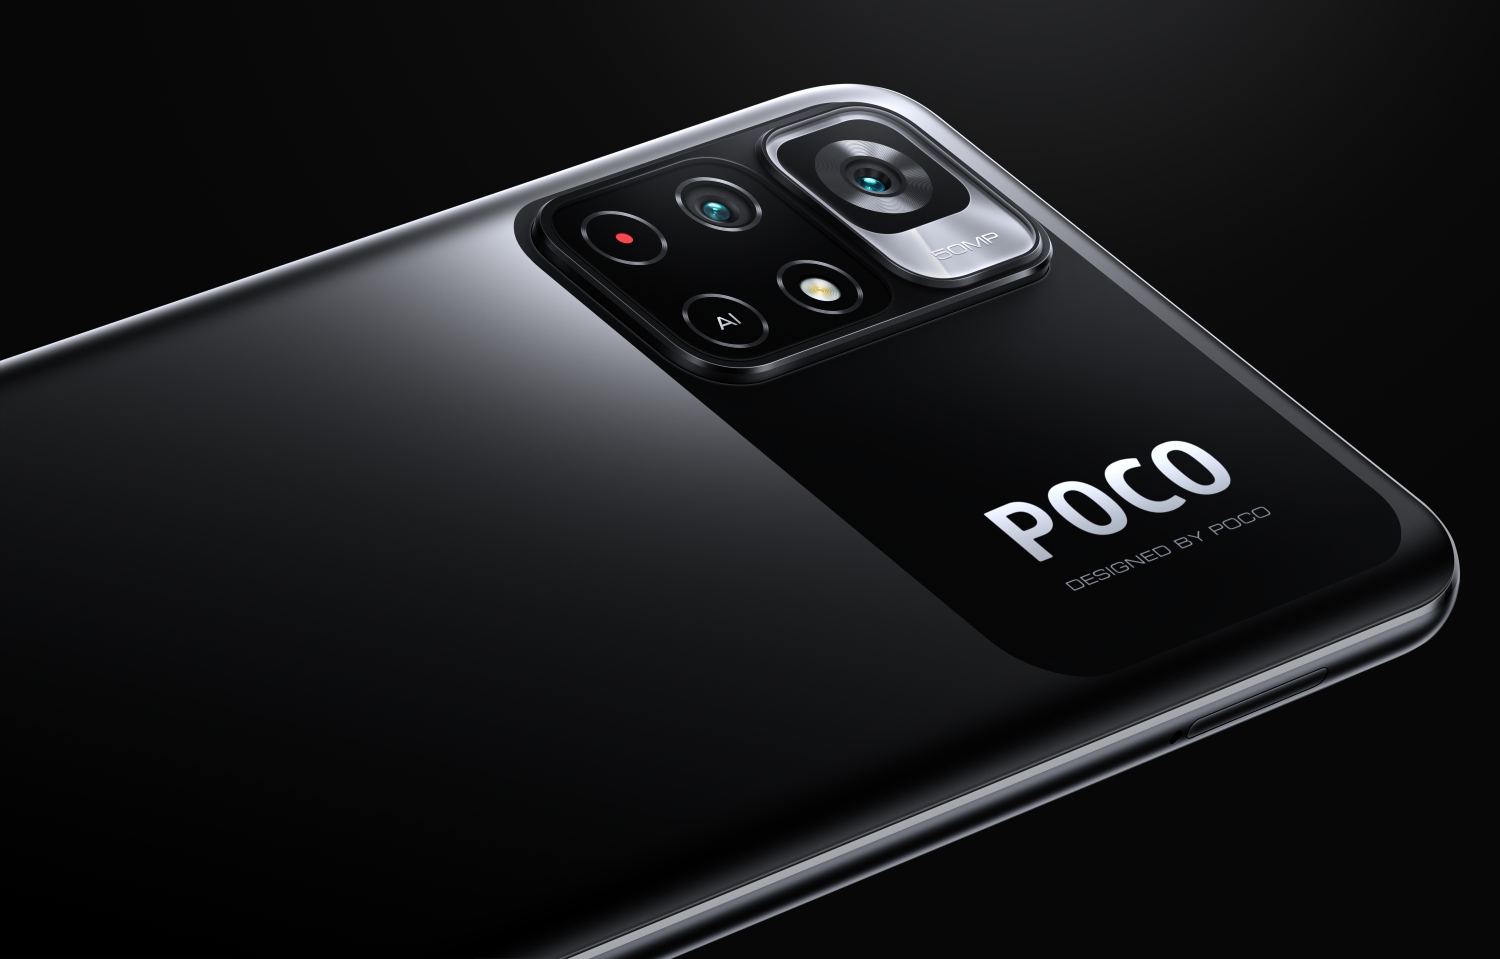 Poco M4 5G Malaysia: Poco's new entry-level 5G smartphone, available from  as low as RM649 - SoyaCincau